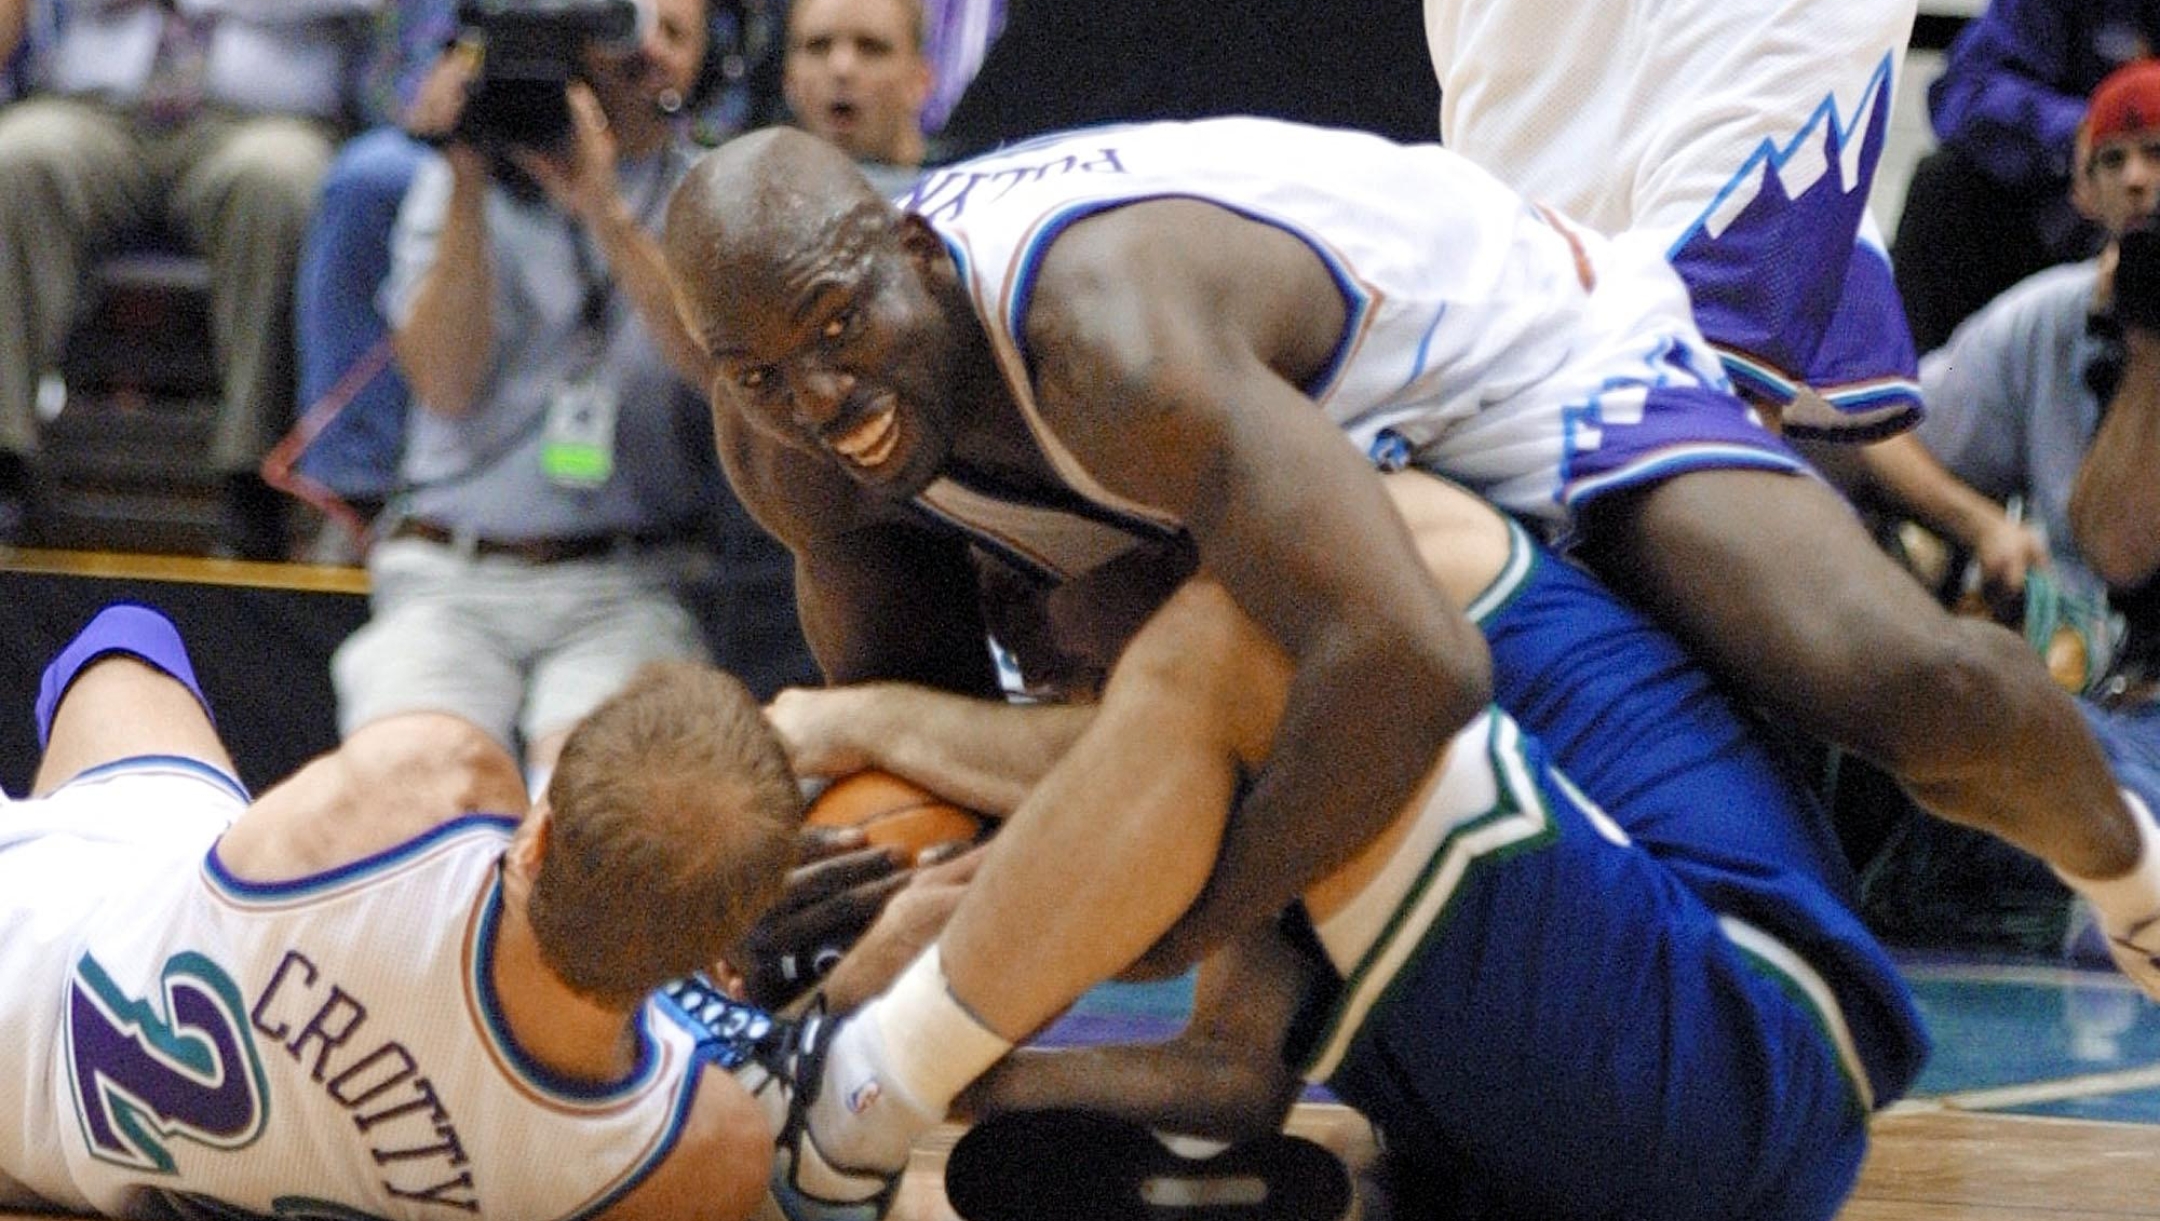 Olden Polynice (TOP) and John Crotty (L) of the Utah Jazz tie up Steve Nash (BOTTOM) of the Dallas Mavericks during game five of their first round NBA Western Conference playoff 03 May 2001 in Salt Lake City, Utah. Dallas won the game over Utah 84-83 to advance to the second round. AFP PHOTO/George FREY (Photo by GEORGE FREY / AFP)